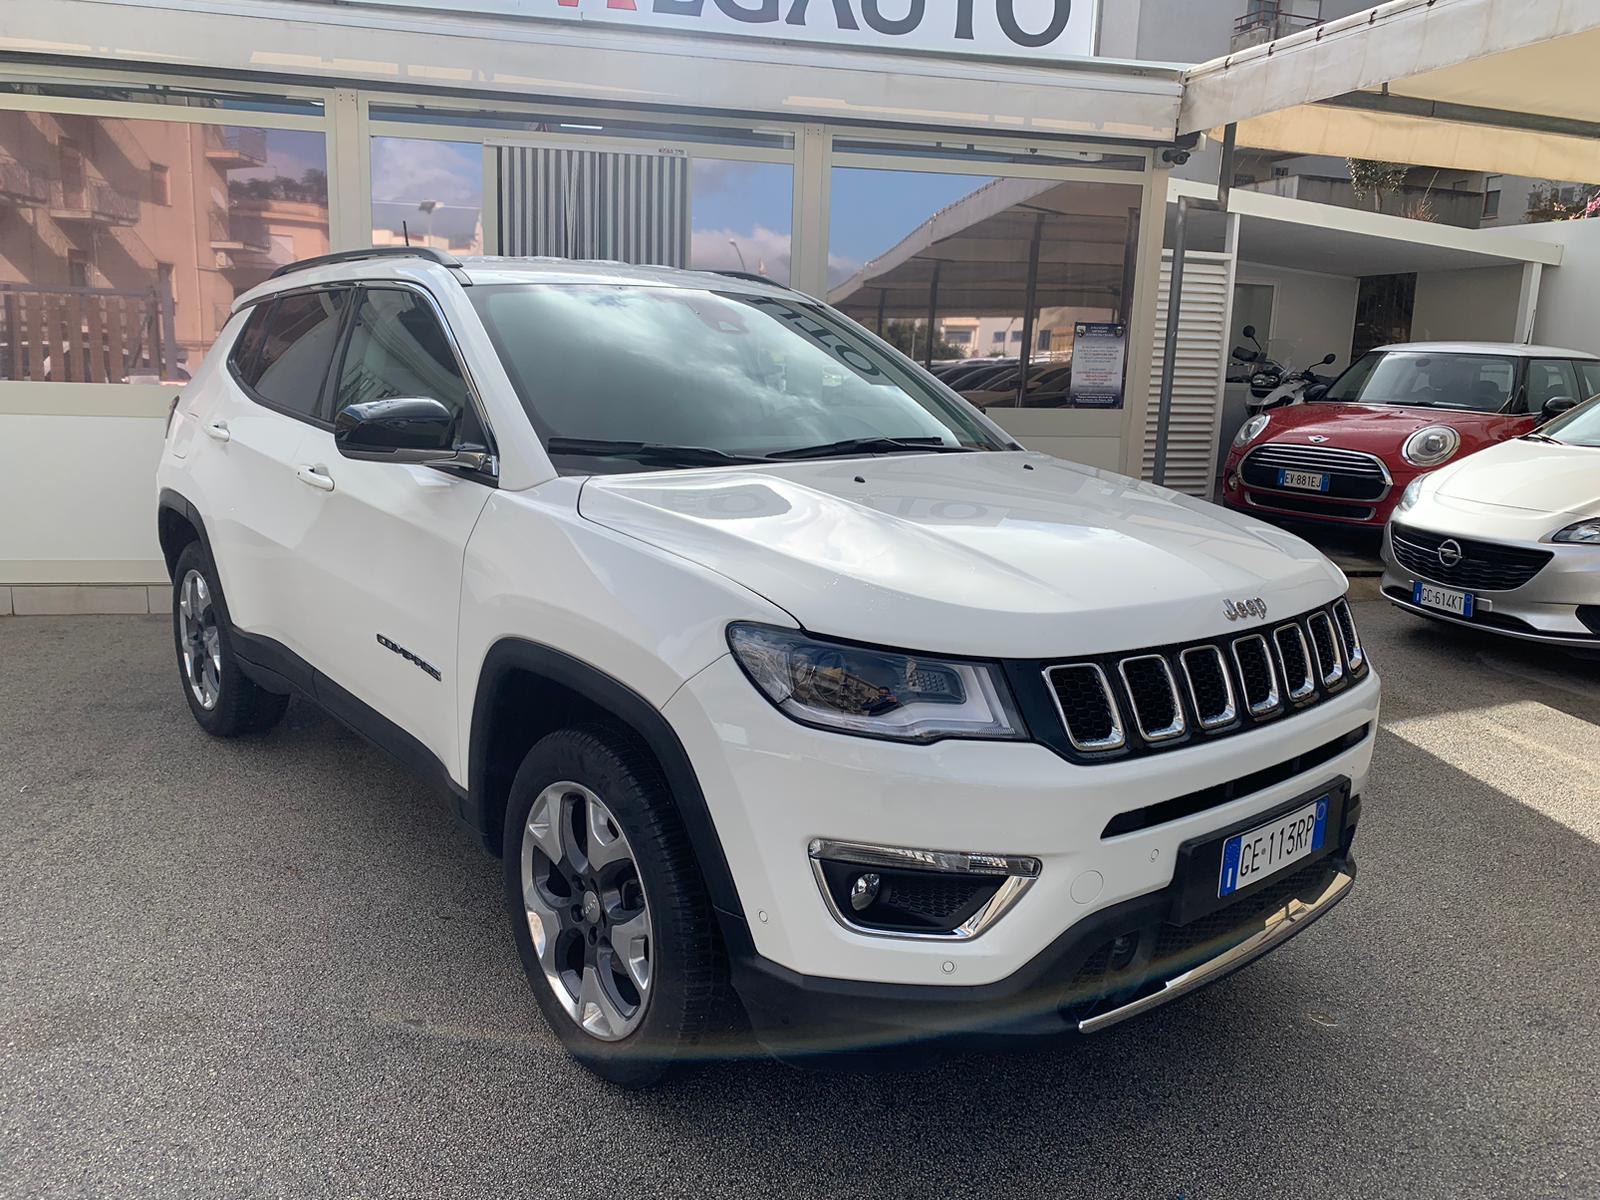 Jeep Compass 2.0 Multijet, Limited 4WD